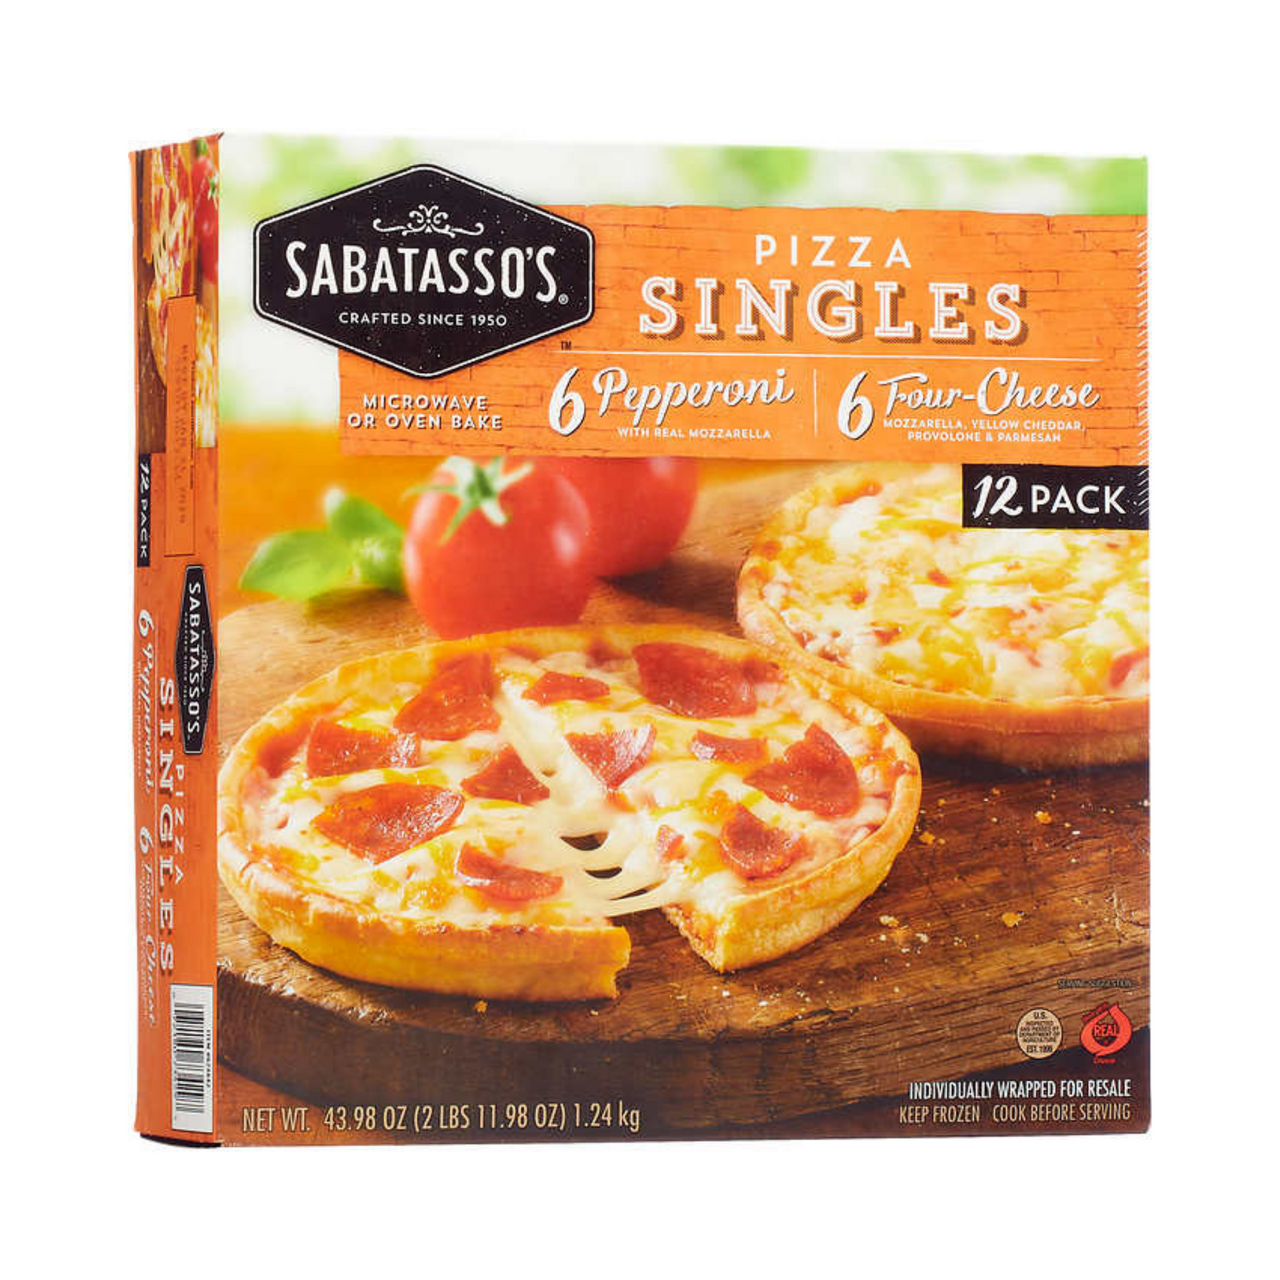 Image of Sabatasso's Pizza Singles 12 Pack; 6 Pepperoni 6 Four-Cheese